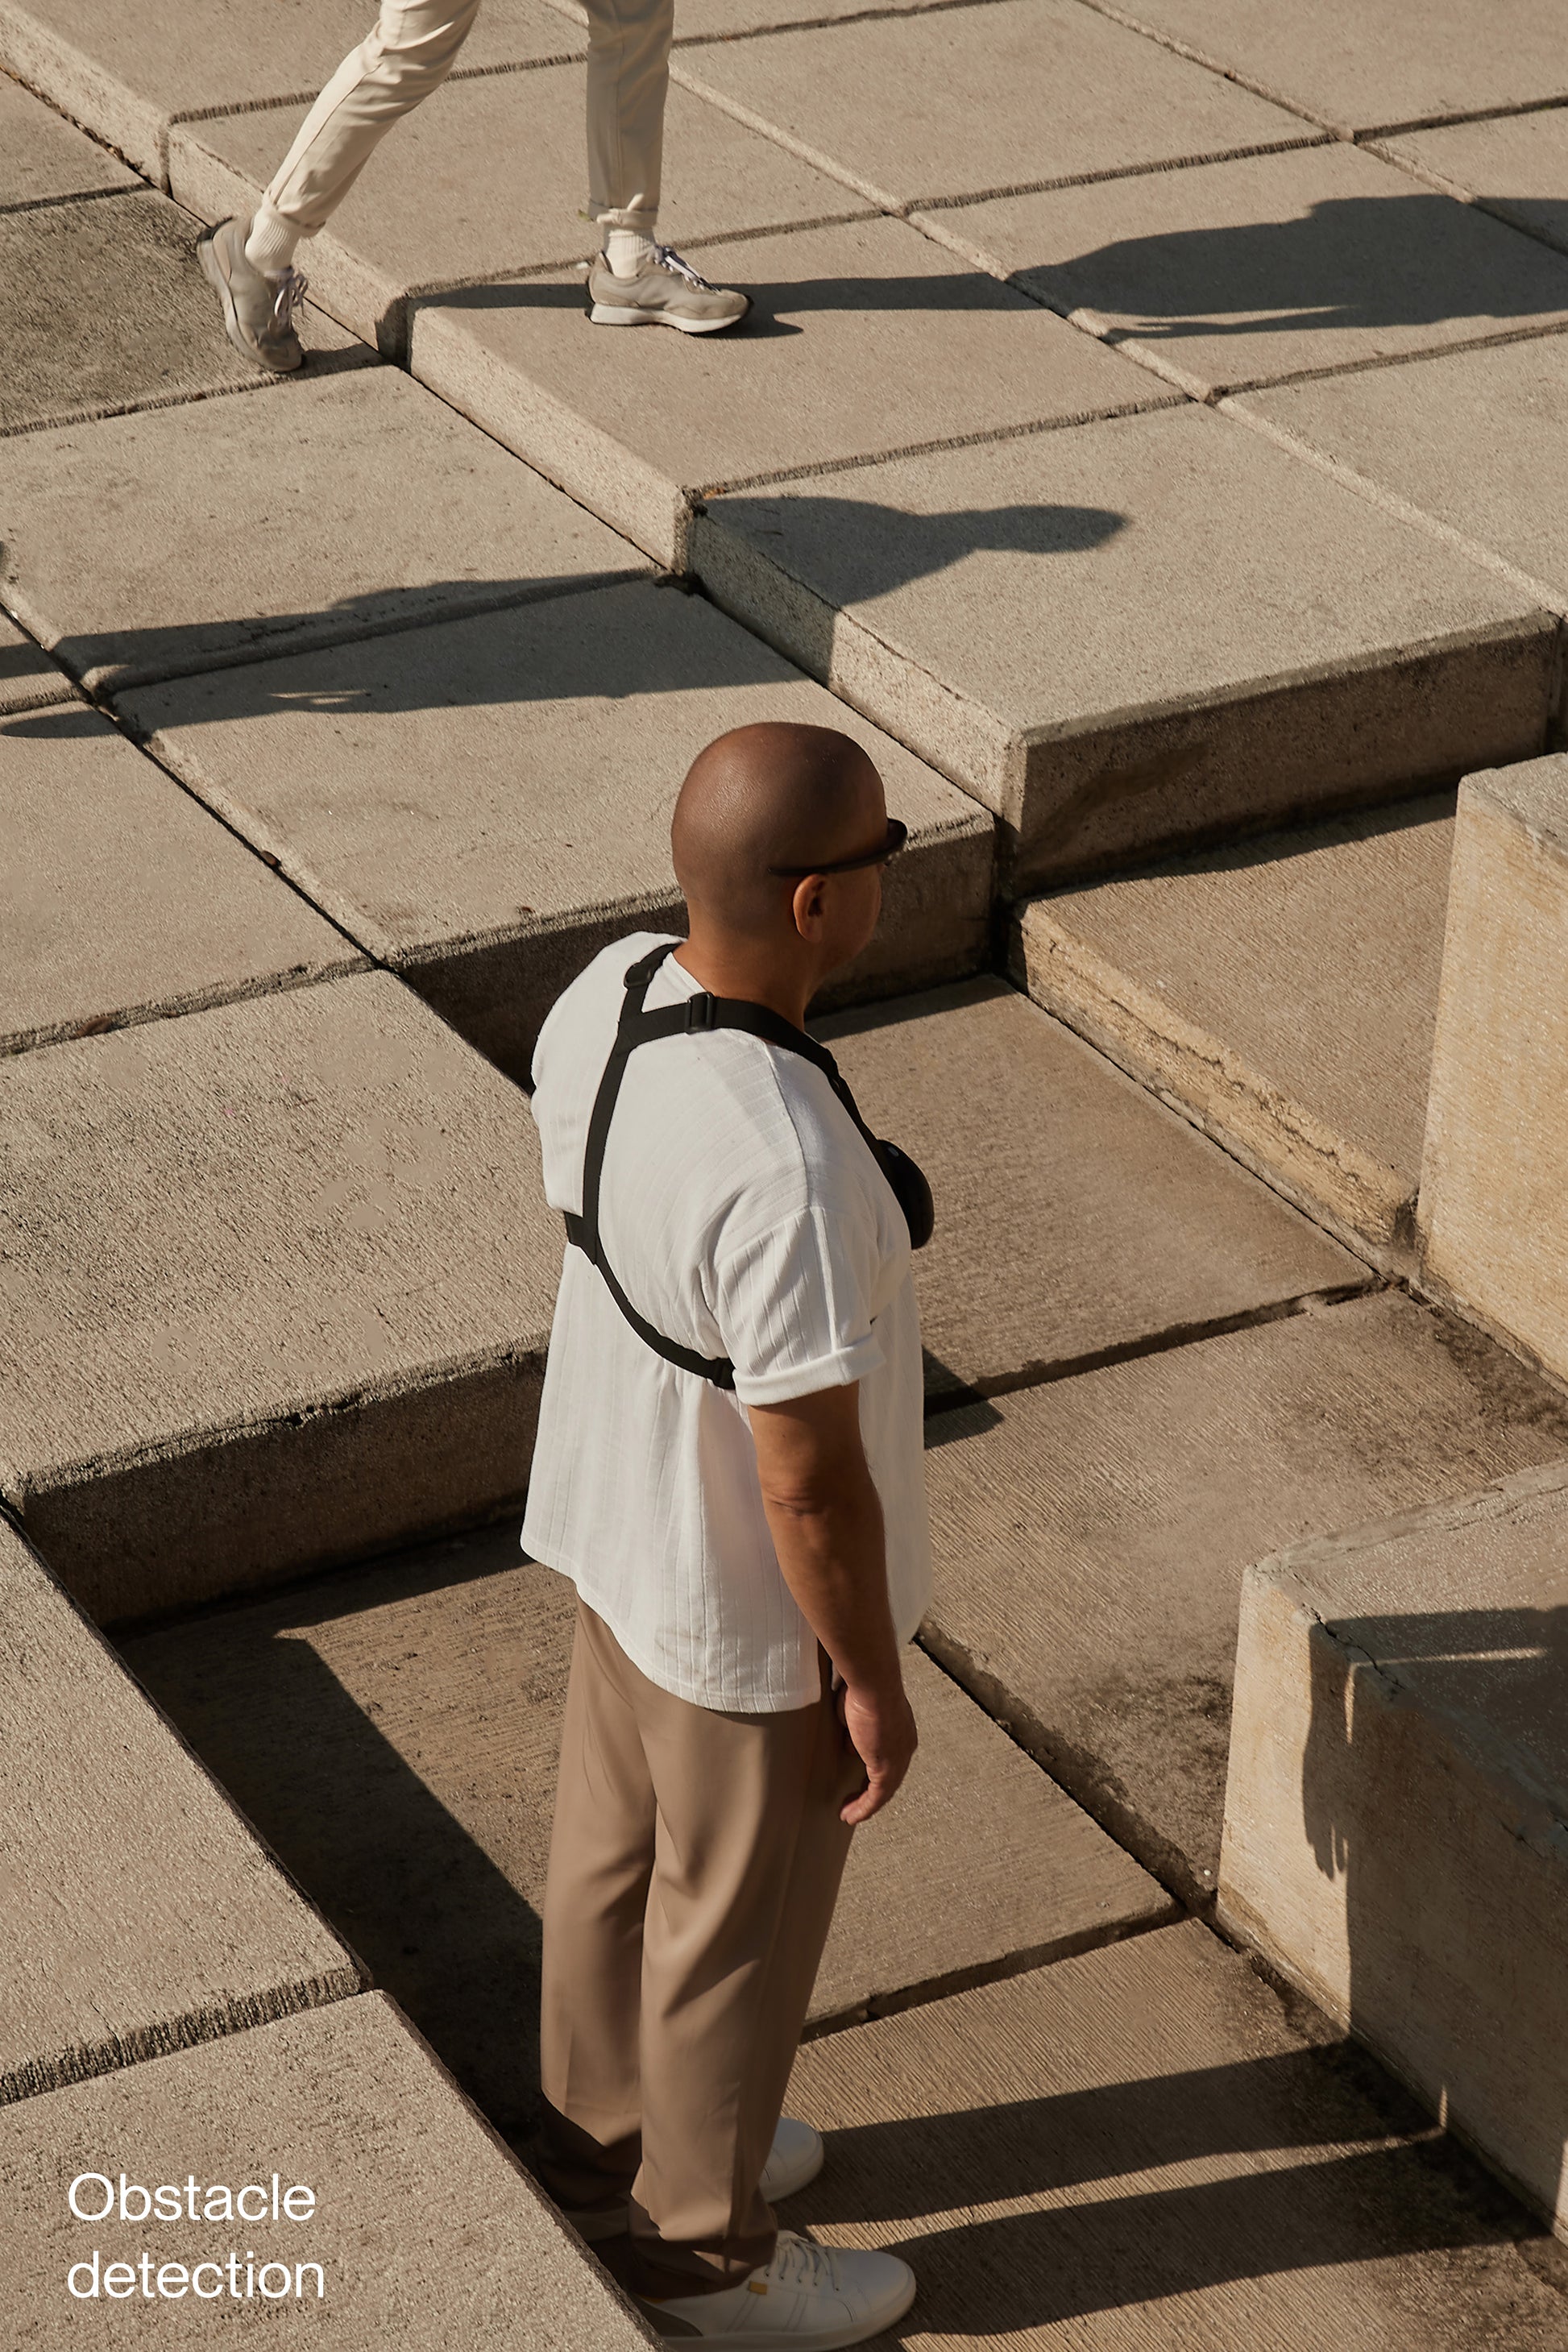 Man shown standing outside with concrete block in front of him, he has glasses and Are device strapped to his upper body.